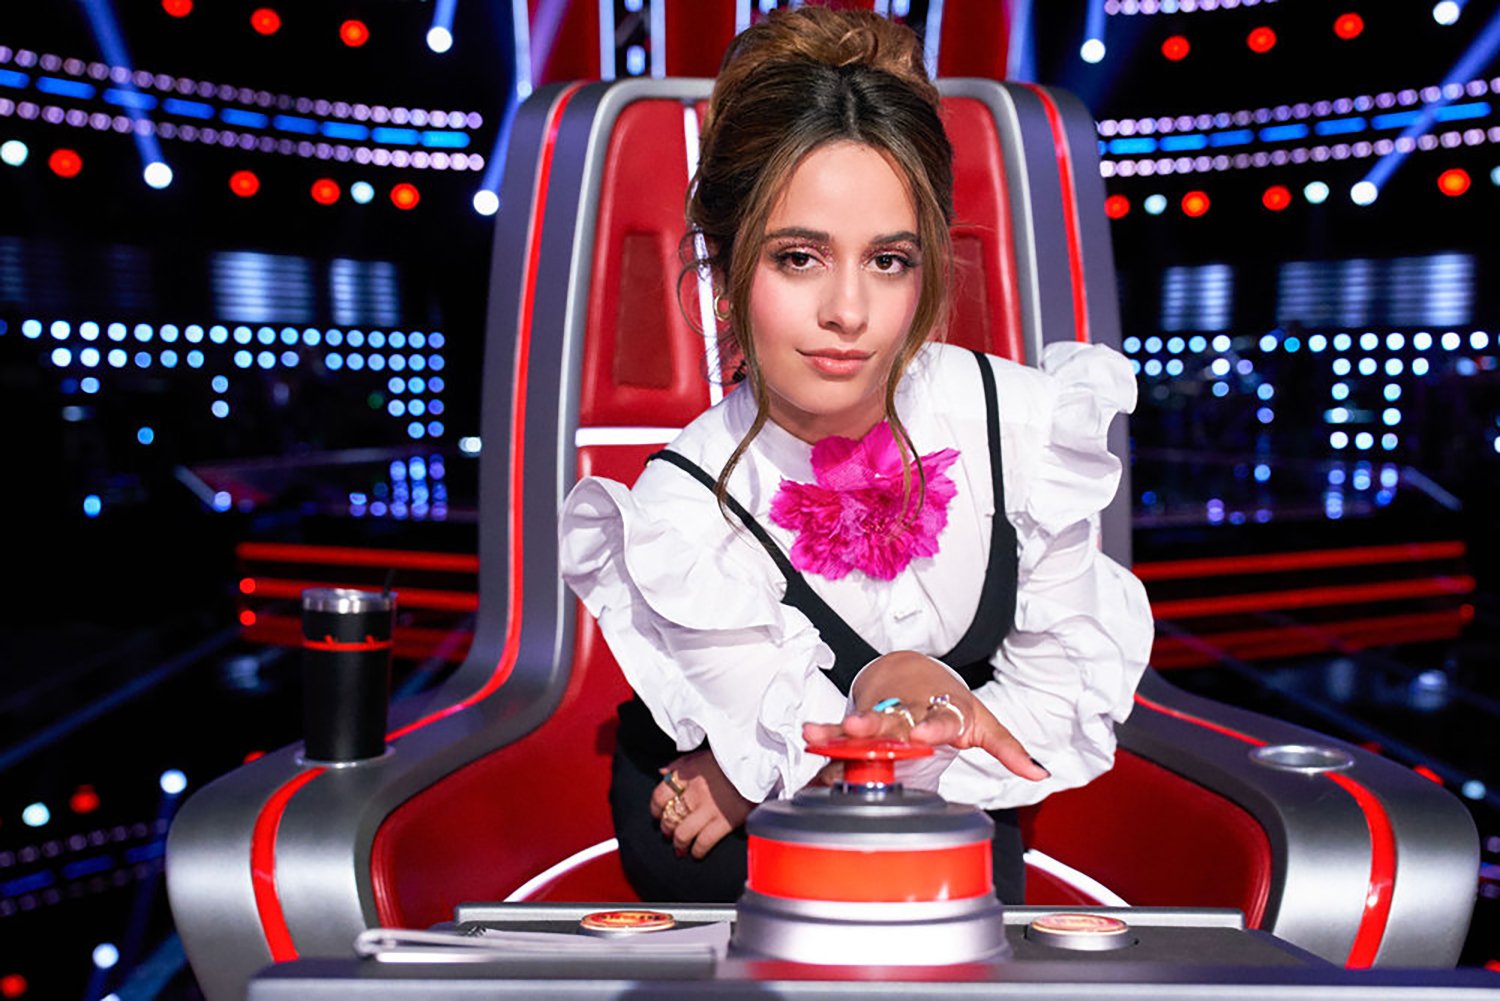 Camila Cabello poses in her chair with her hand on her button on The Voice Season 22